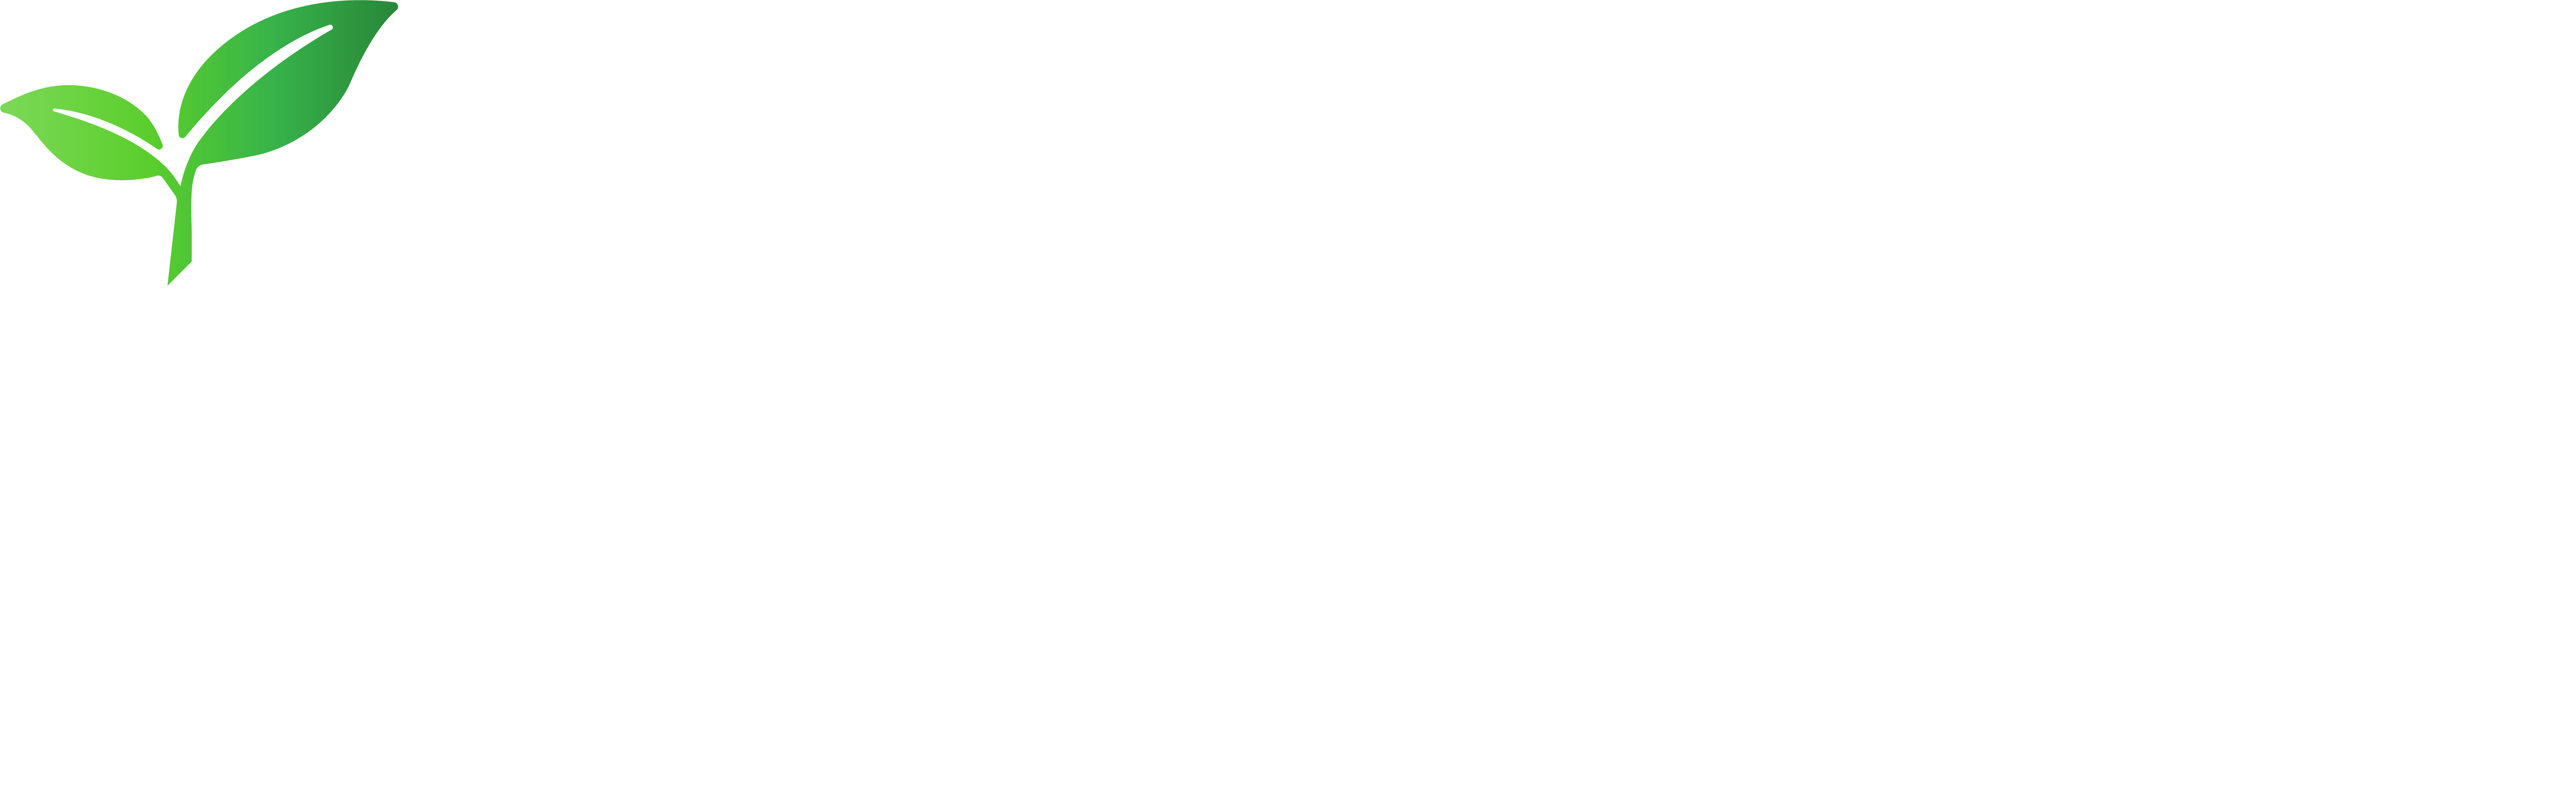 Howell Logo - Home - The Howell Group